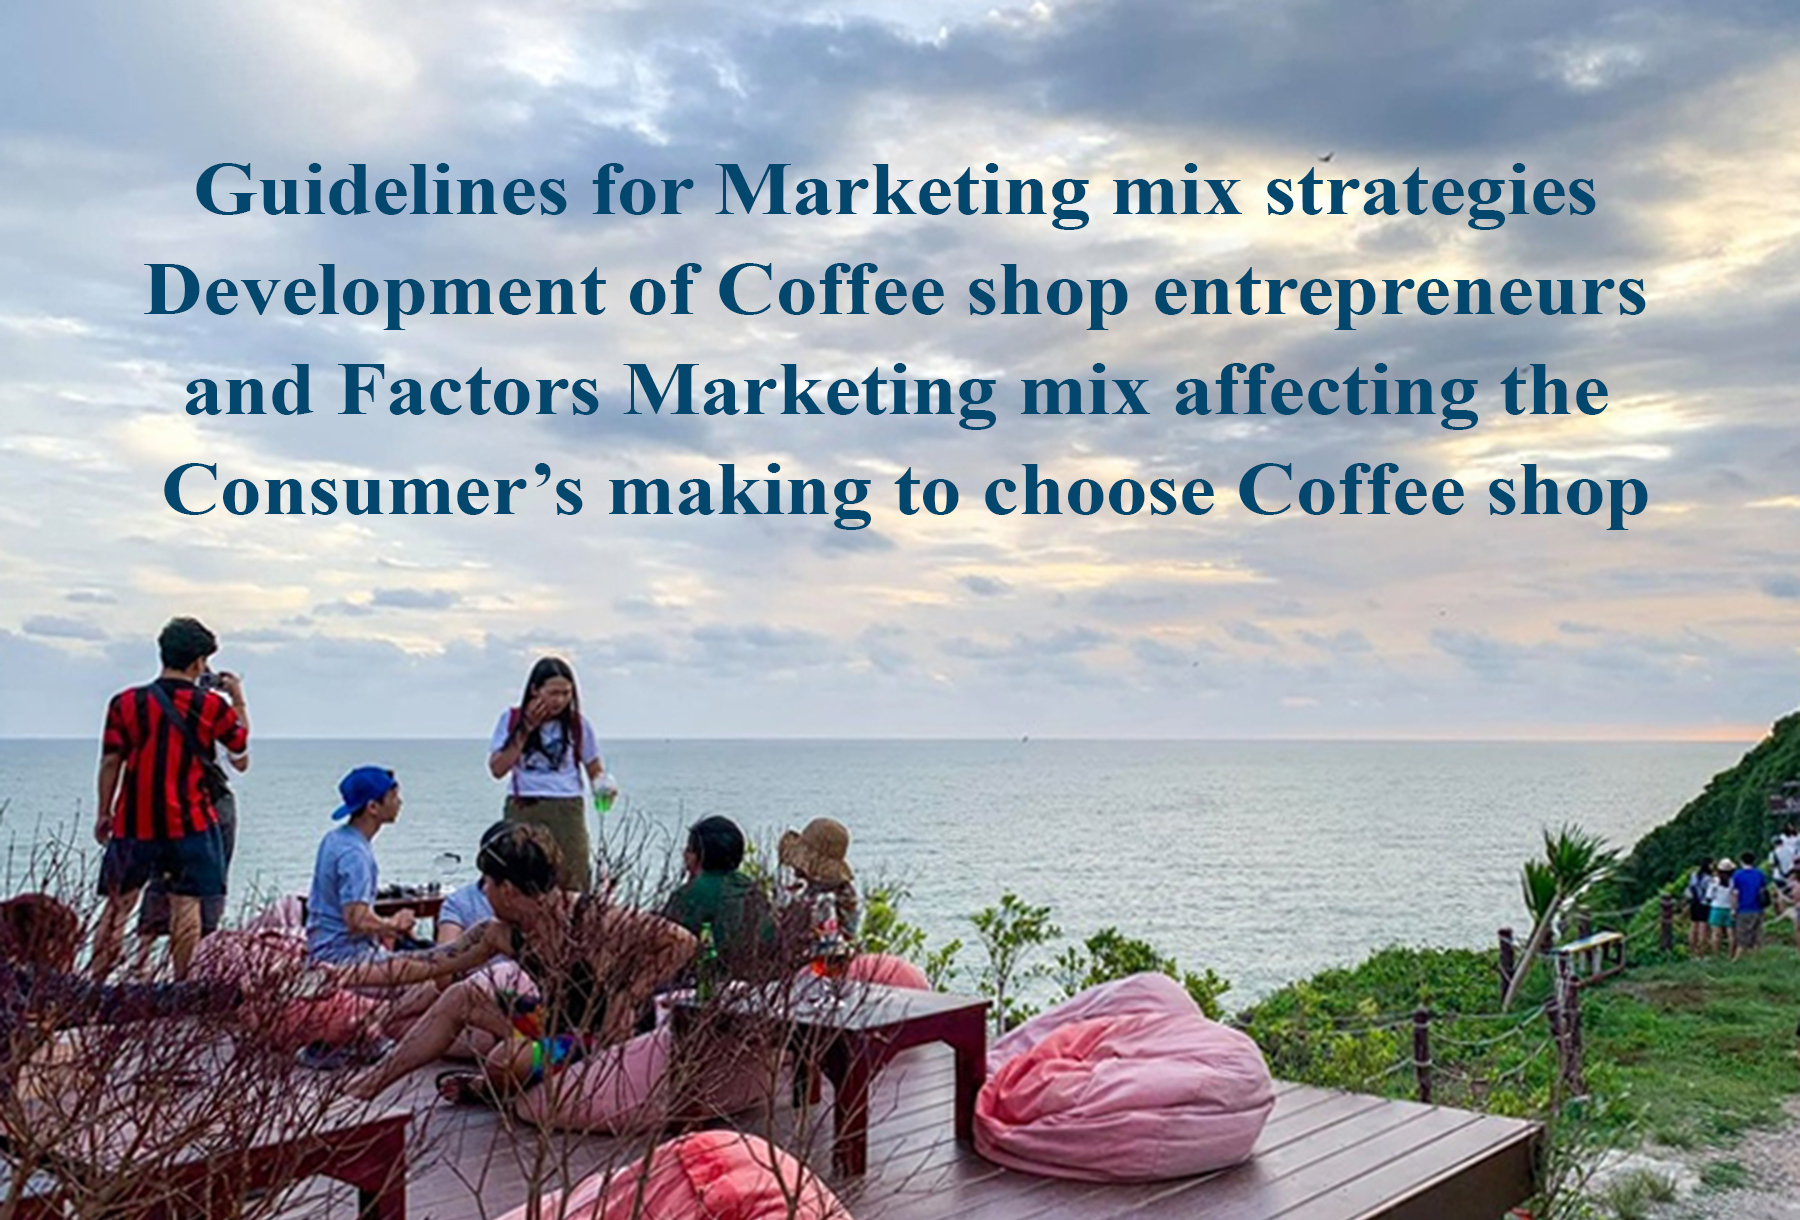 Guidelines for Marketing mix strategies Development of Coffee shop entrepreneurs and Factors Marketing mix affecting the Consumer’s making to choose Coffee shop